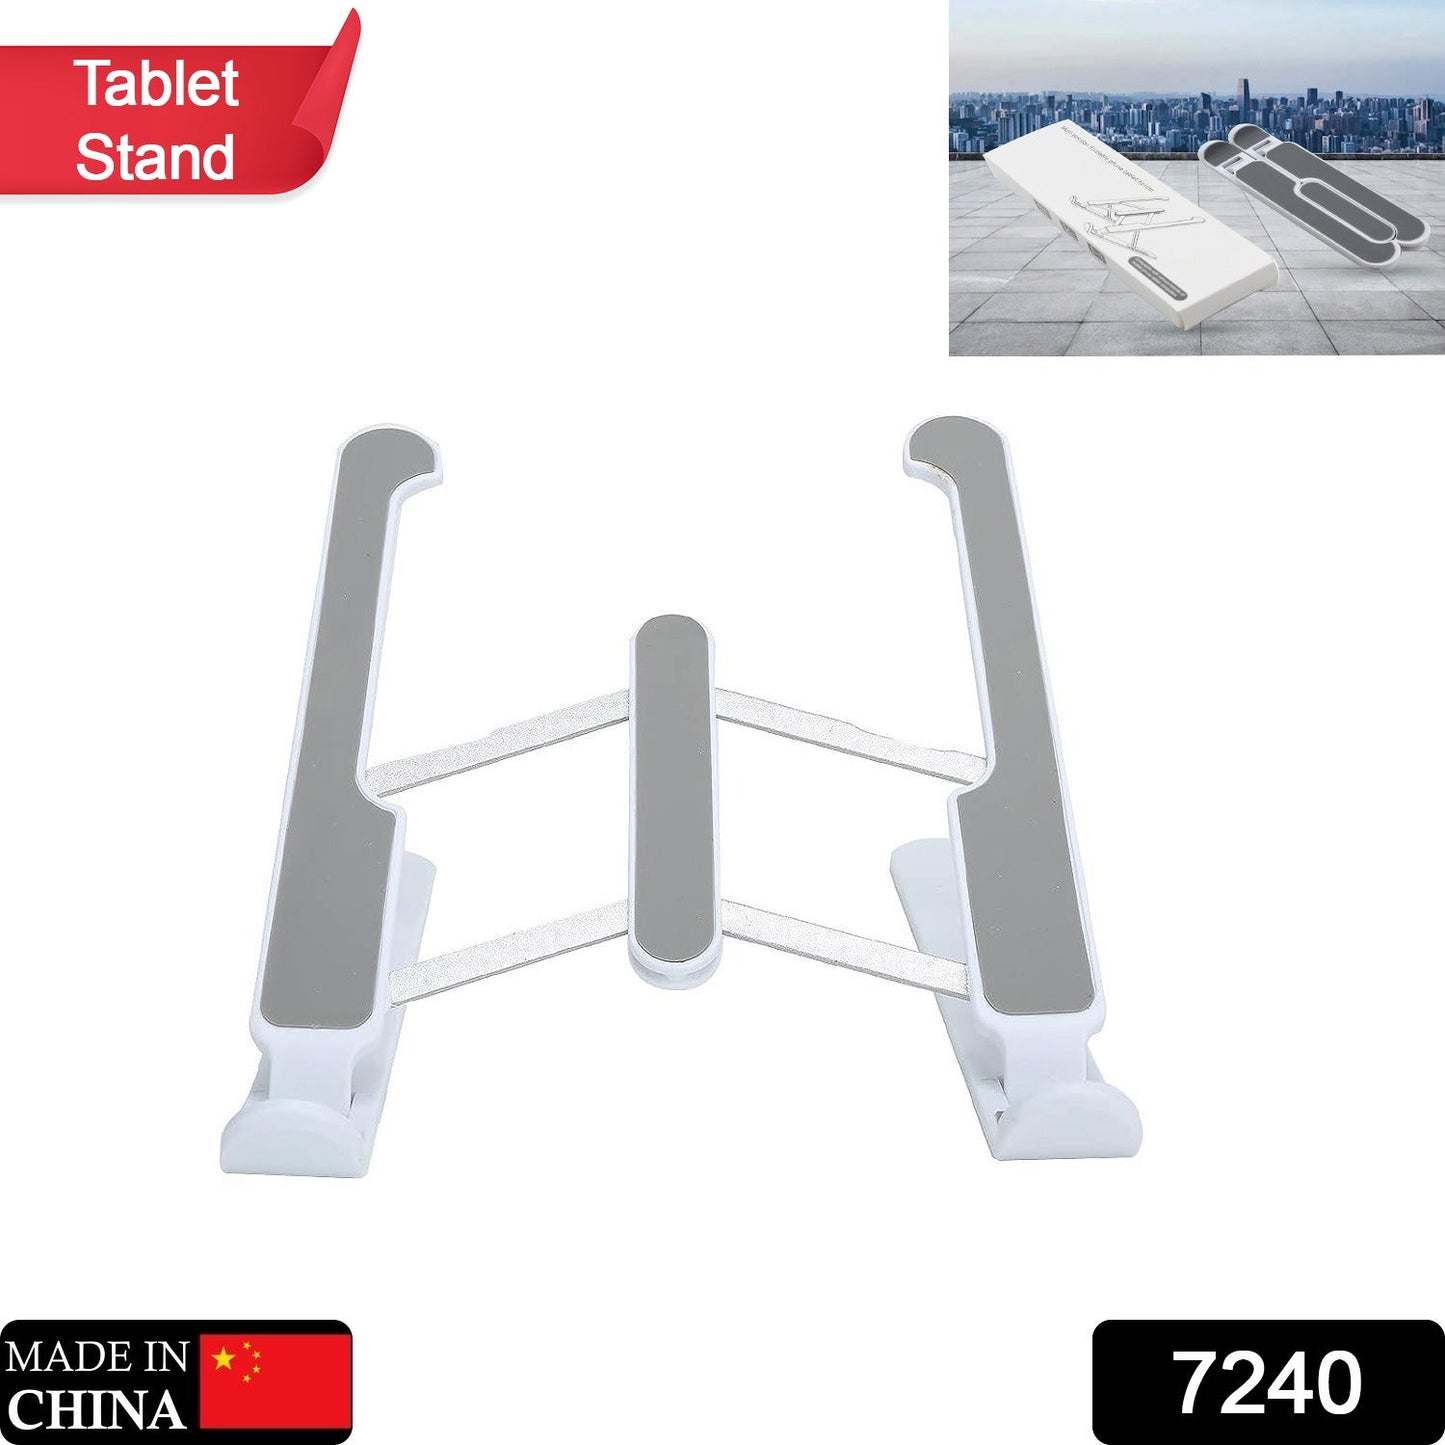 Adjustable Tablet Stand Holder With Built-In Foldable Legs And High Quality Fibre